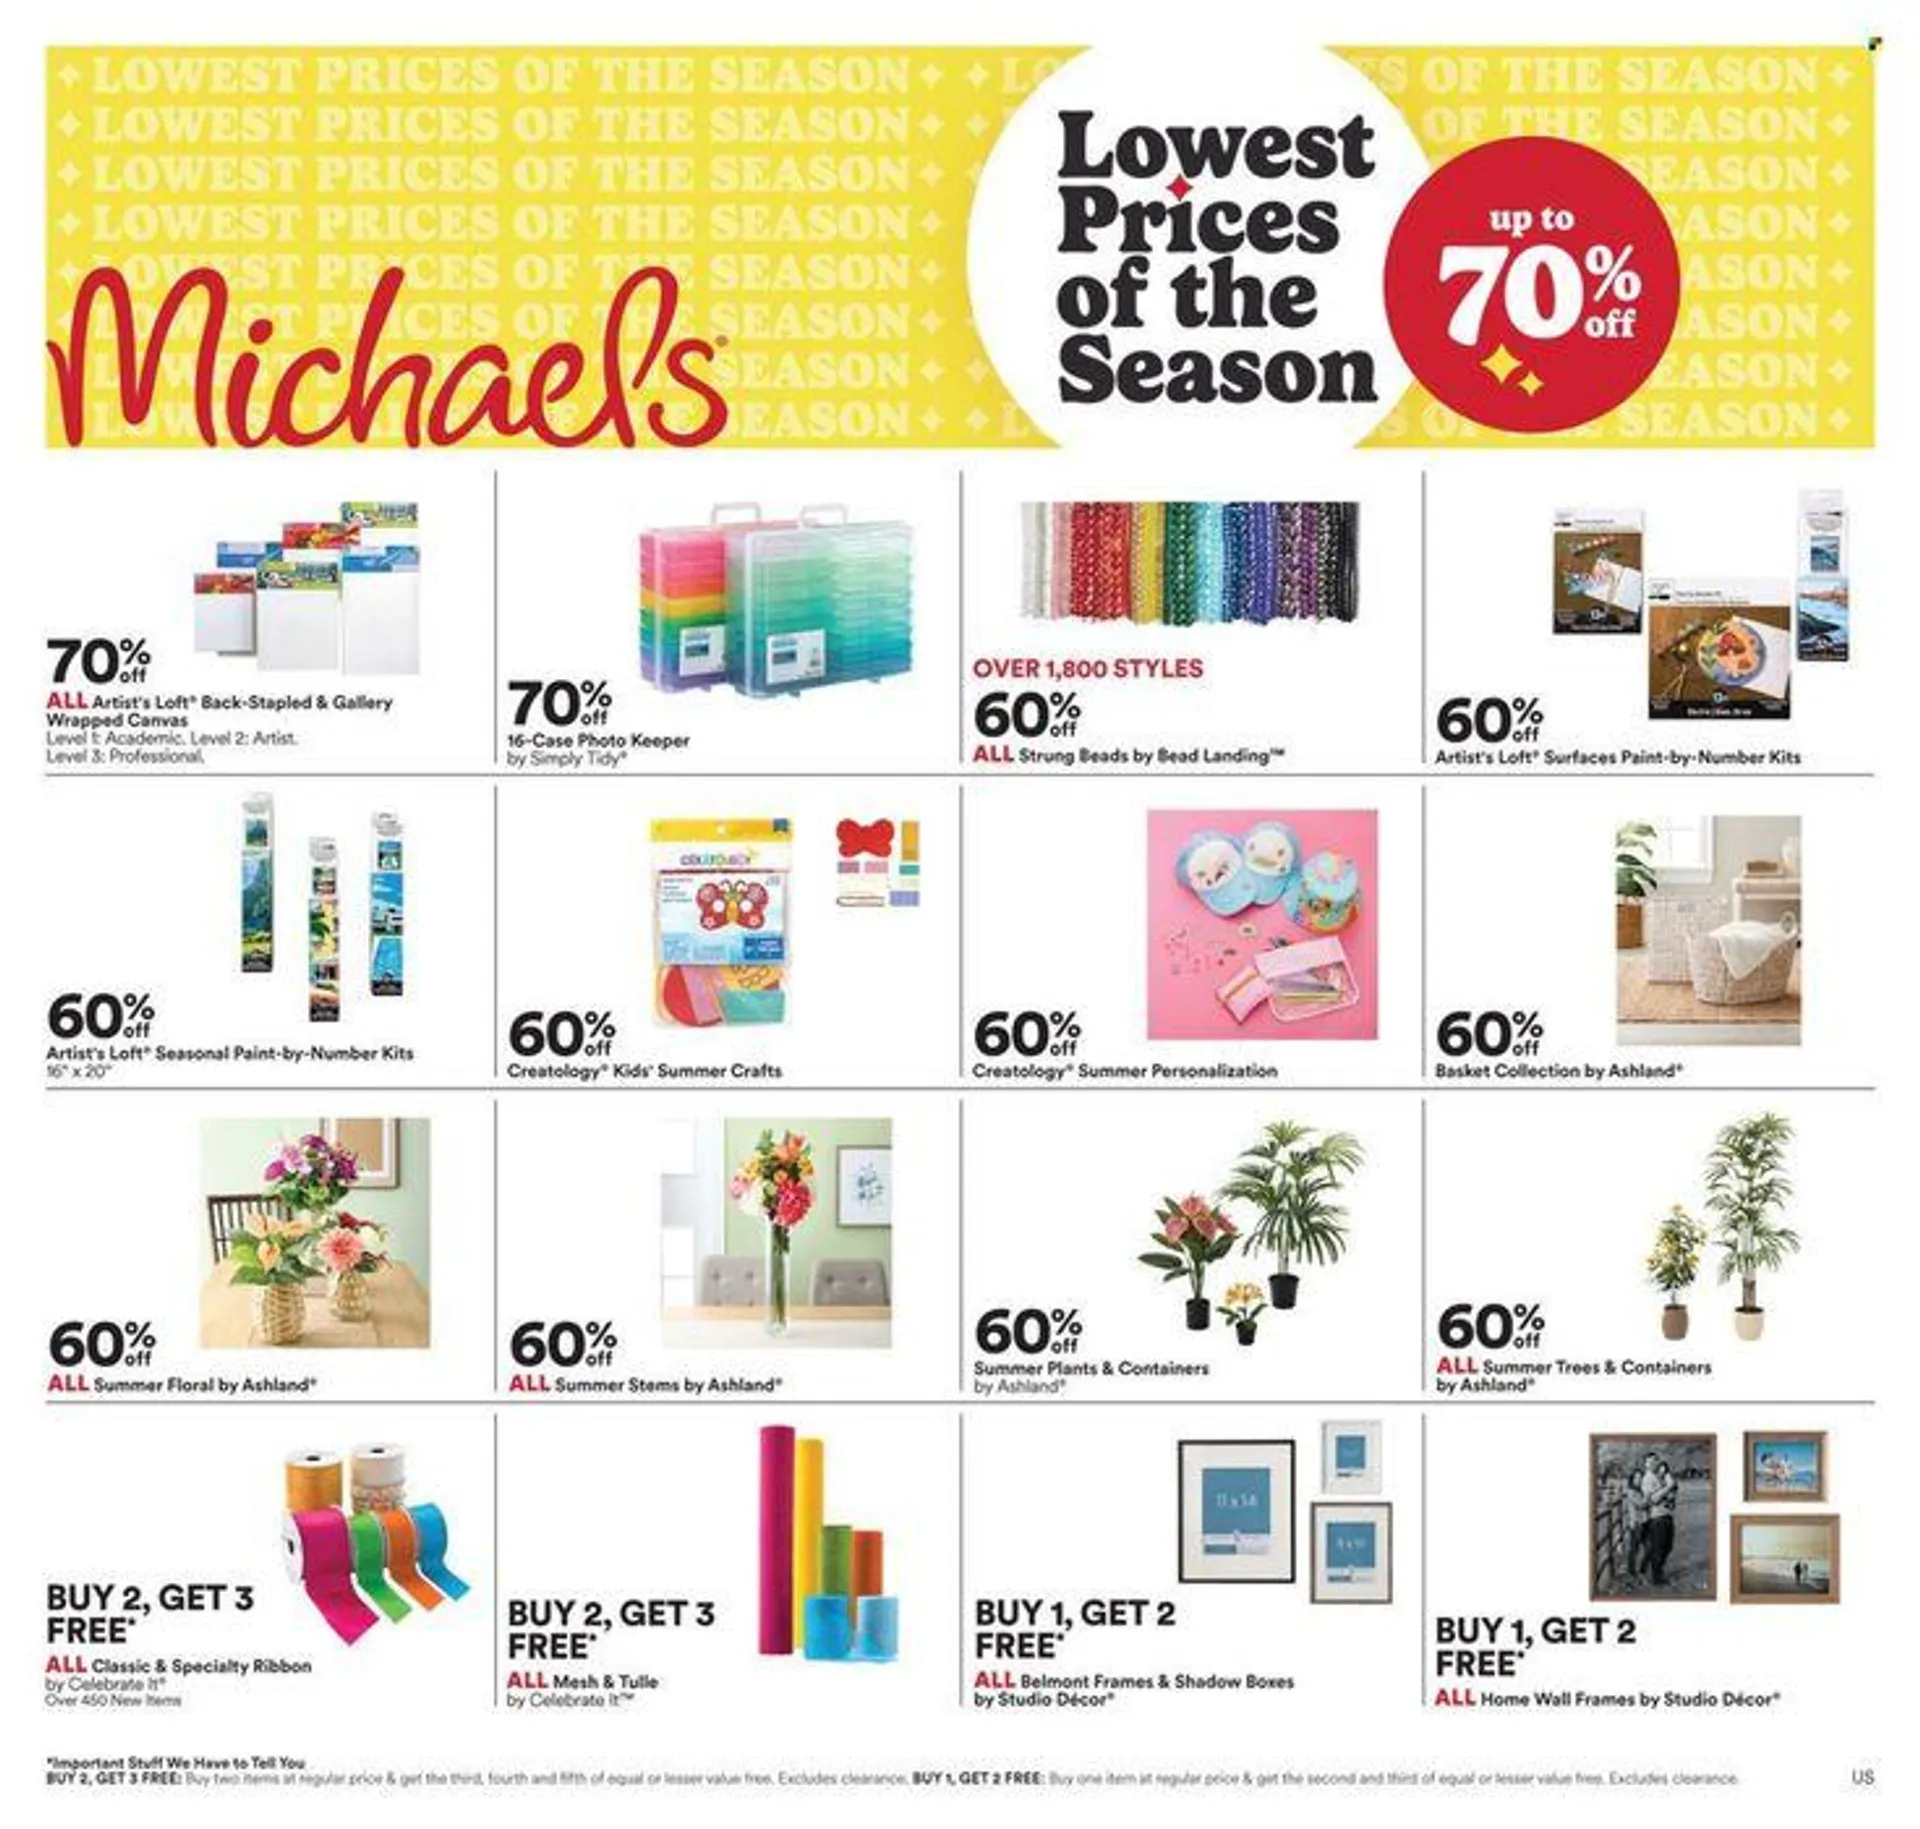 Lowest Prices Of The Season - 1